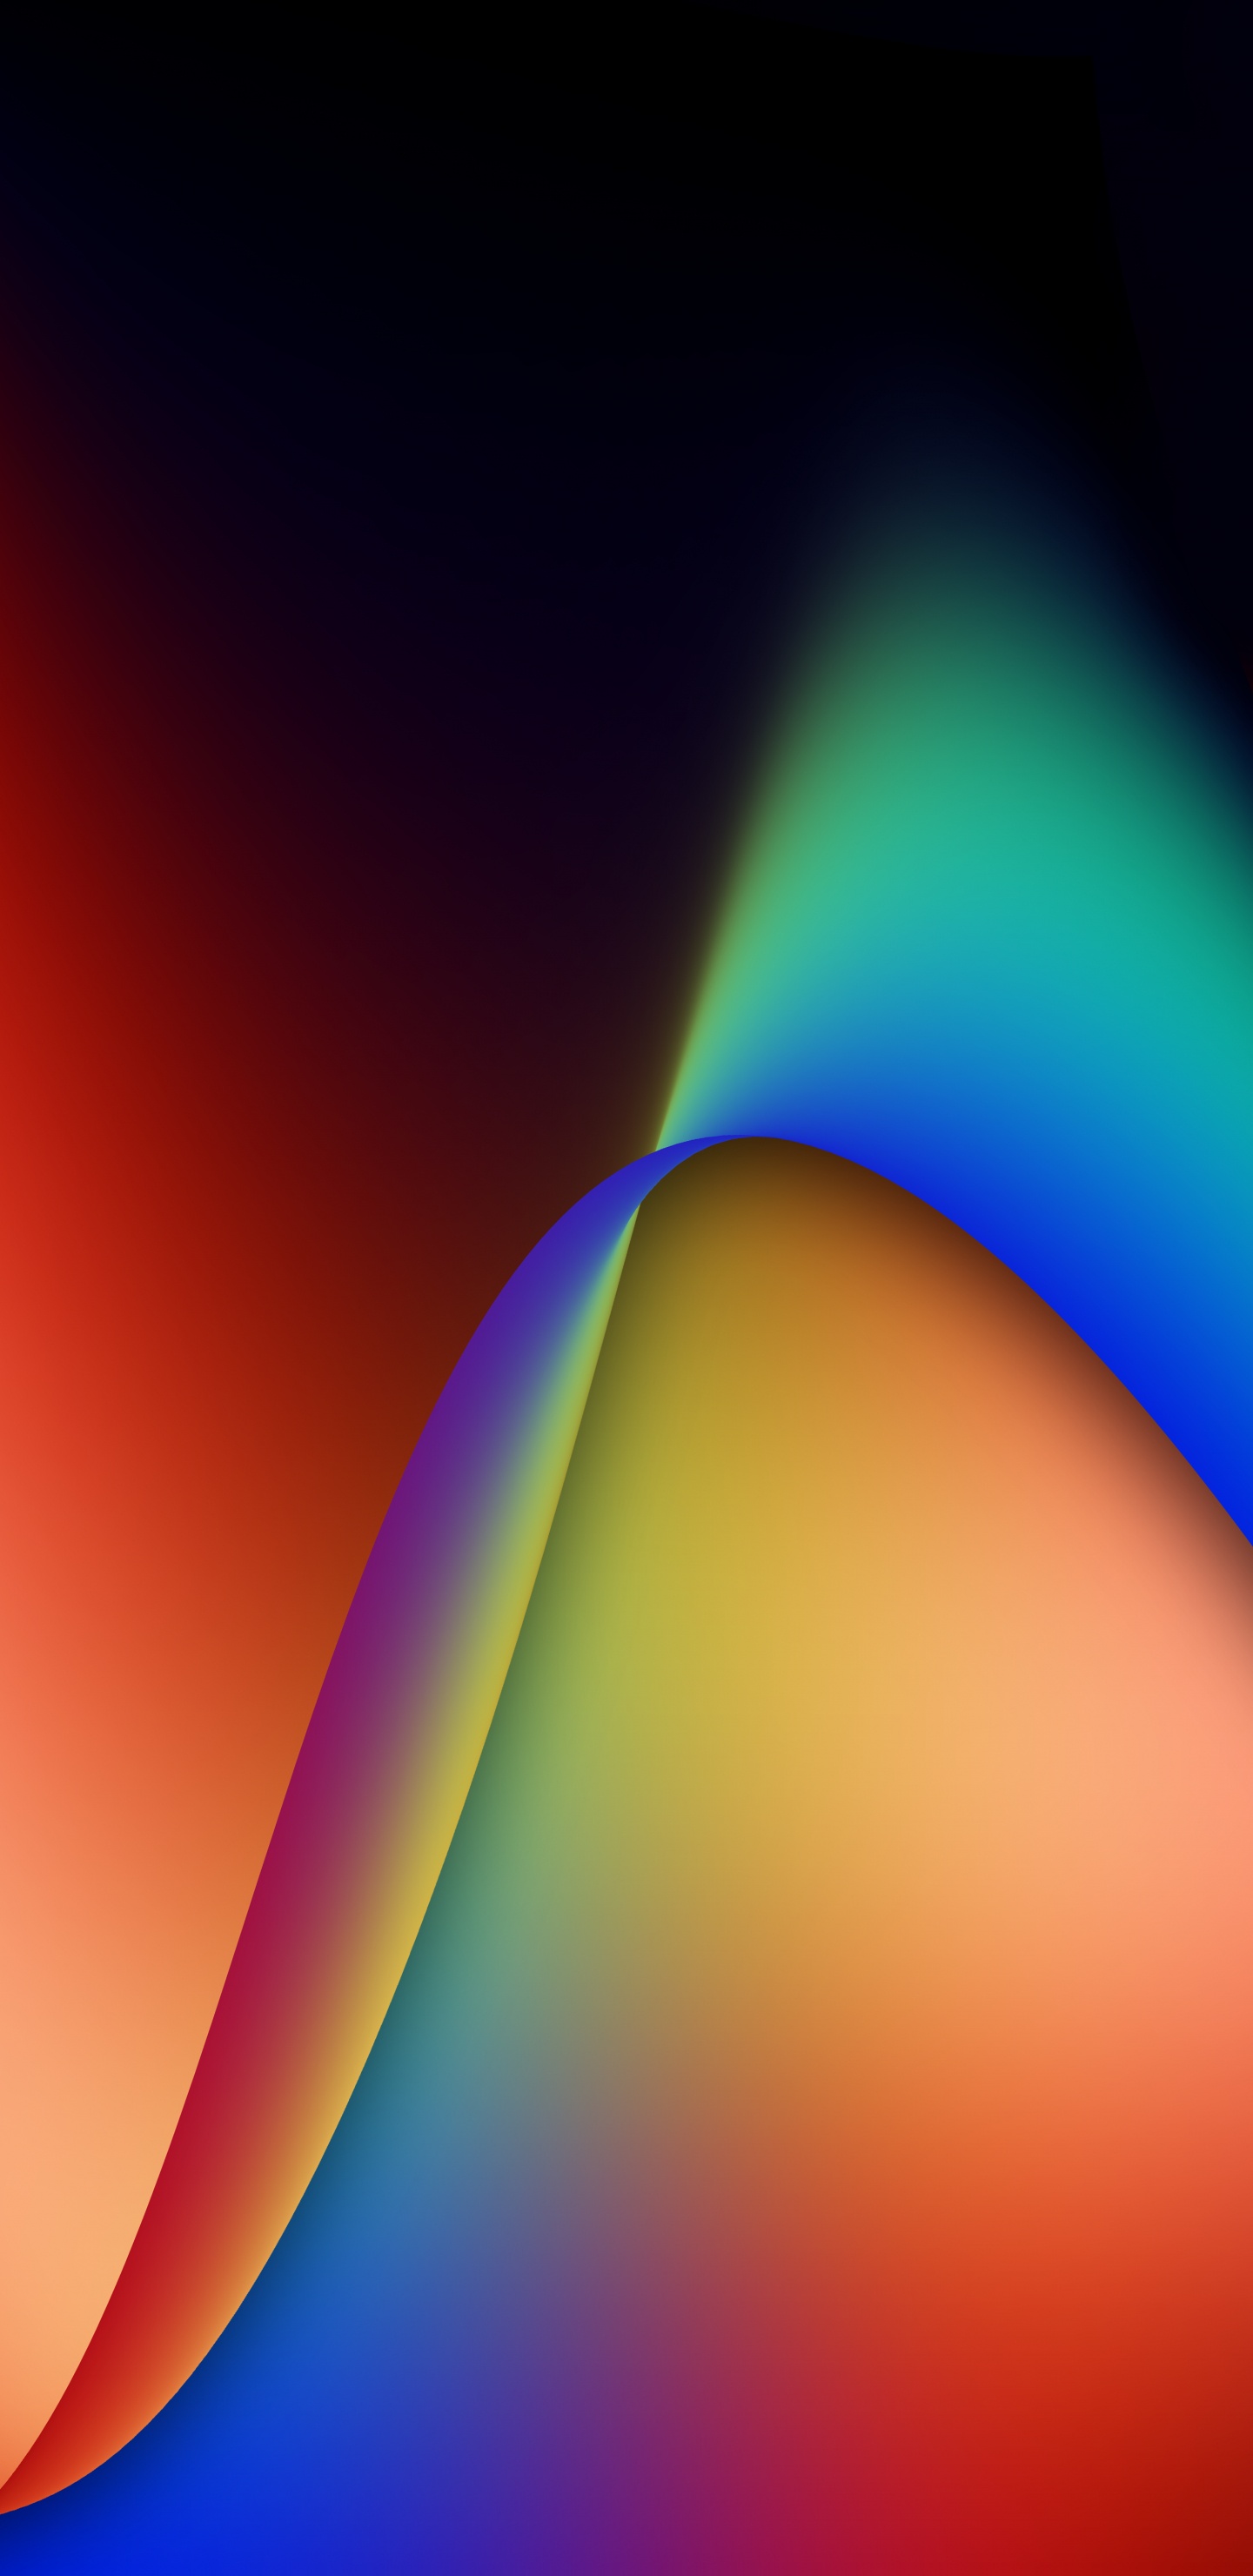 Light, Science, Physics, Colorfulness, Electric Blue. Wallpaper in 1440x2960 Resolution